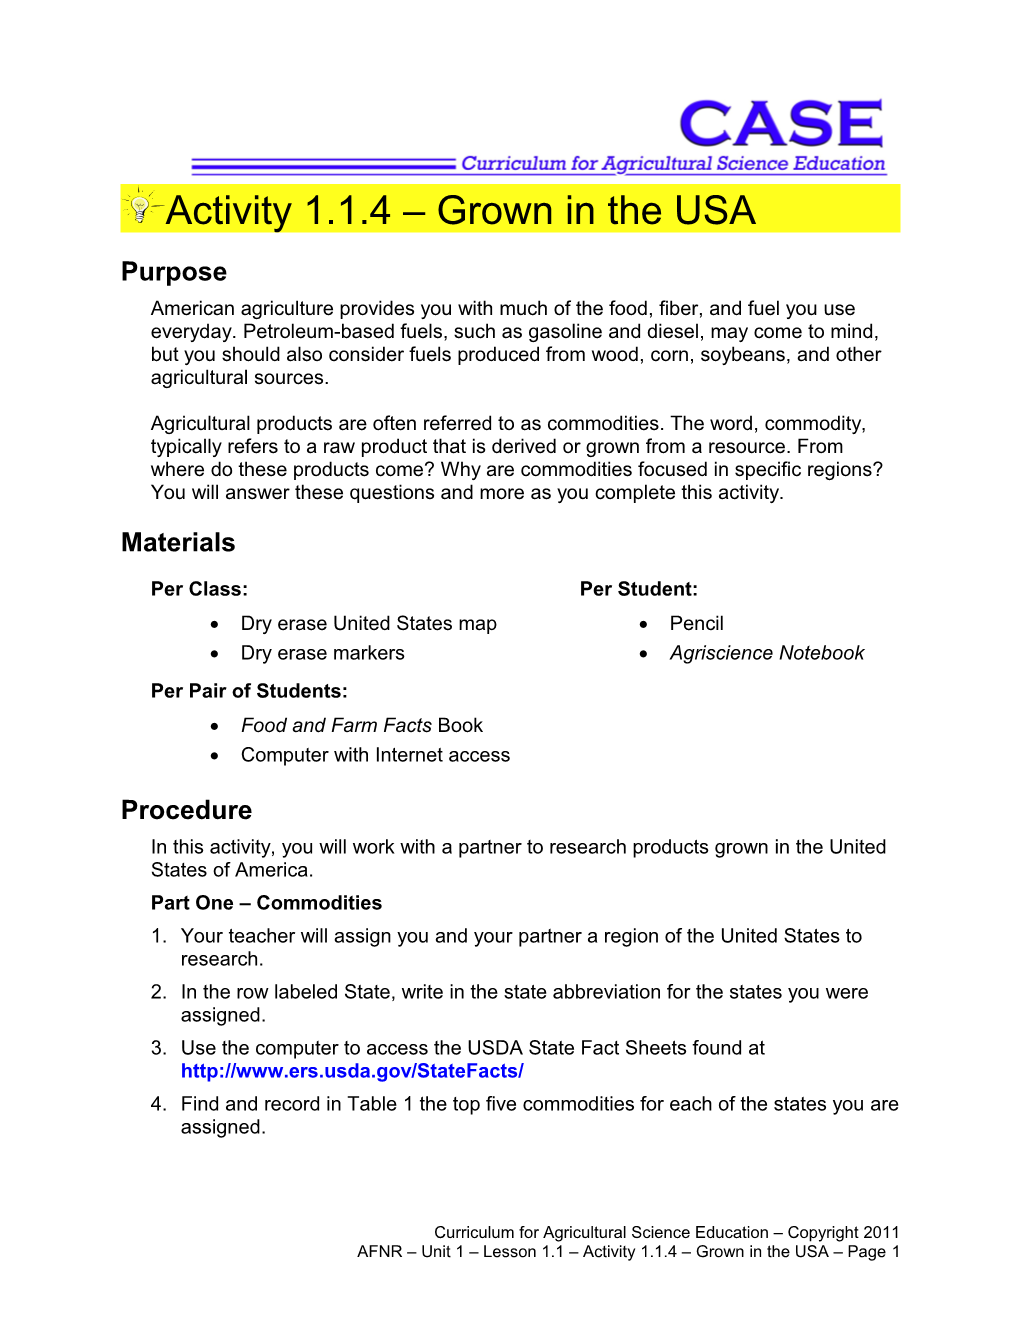 Activity 1.1.4 Grown in the USA